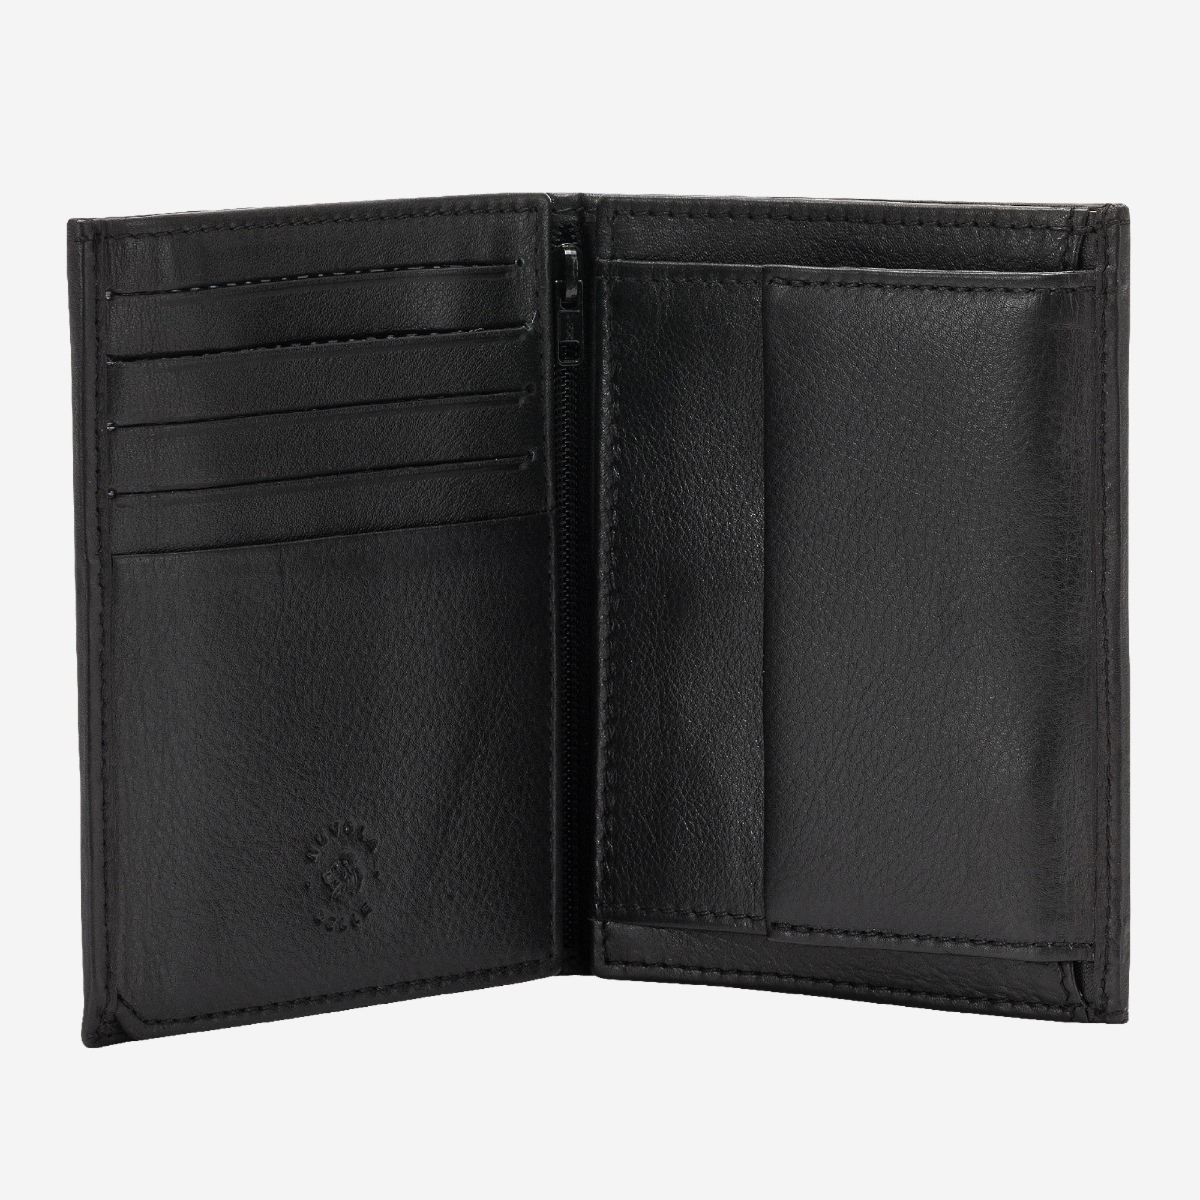 NUVOLA PELLE Vertical small leather wallet with coin pocket - Black